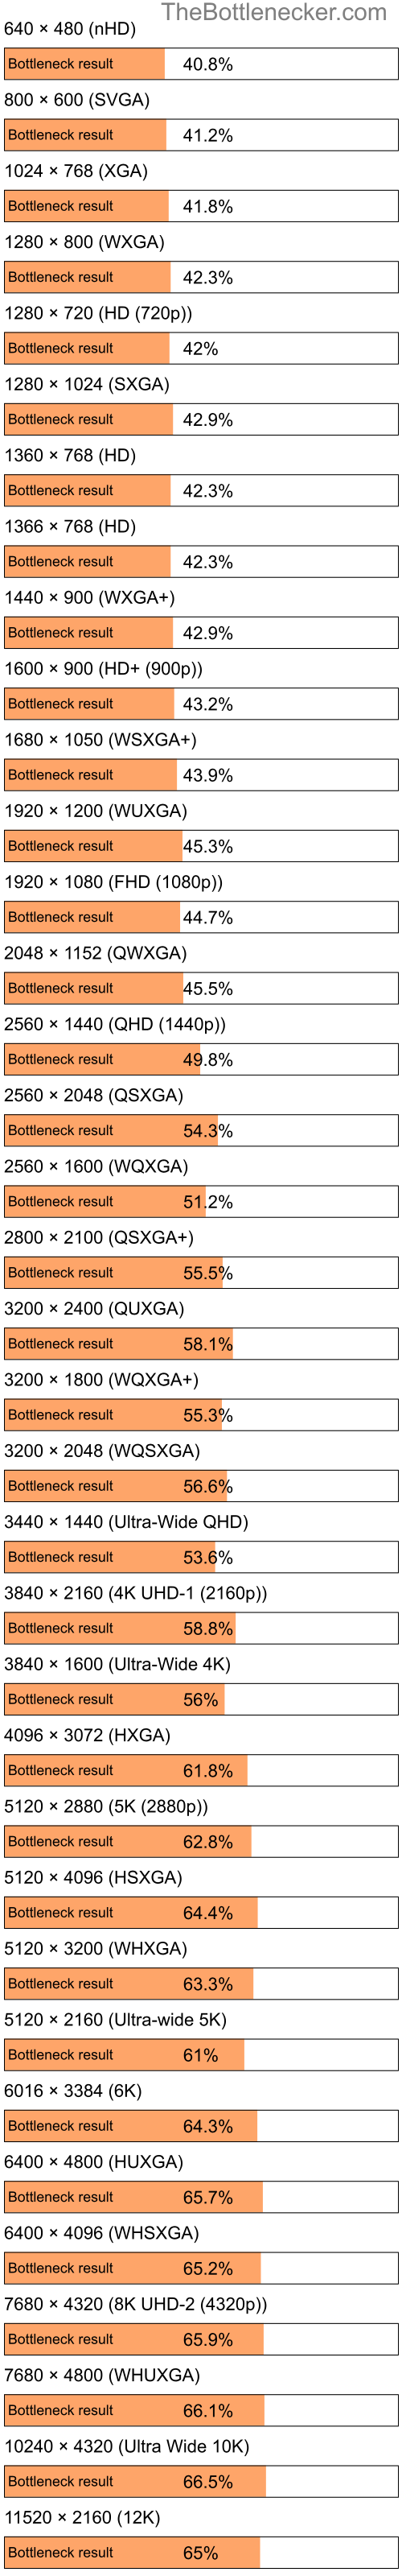 Bottleneck results by resolution for AMD Ryzen 7 7800X3D and NVIDIA GeForce GTX 1050 Ti in Graphic Card Intense Tasks